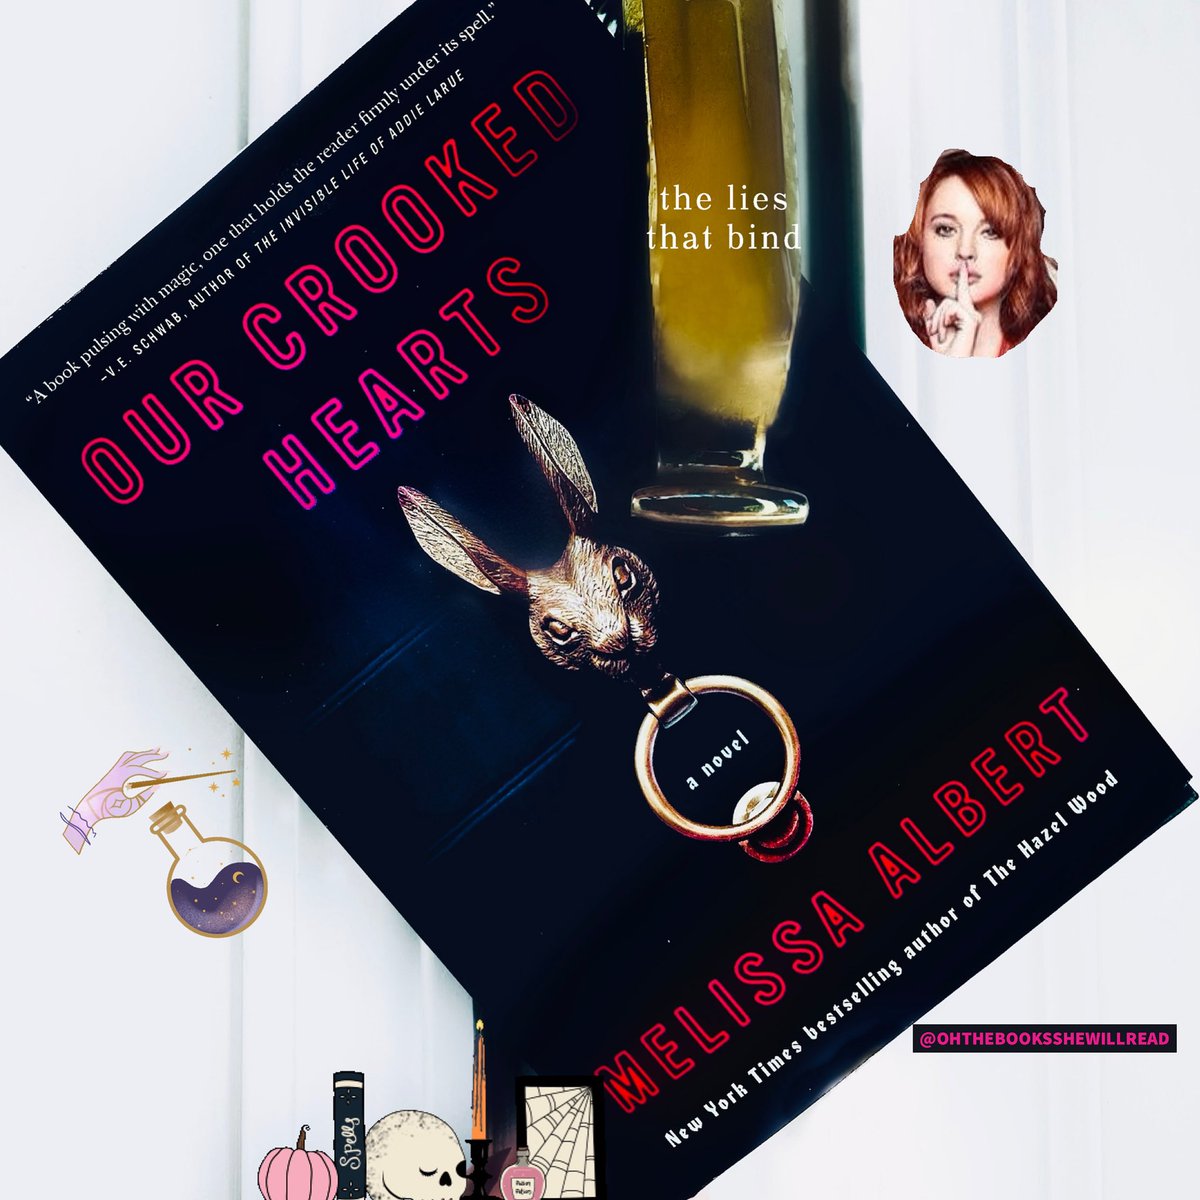 Hi y’all! I am hosting a #BookGiveaway for the newly released #OurCrookedHearts by the talented Melissa Albert on my book blog on Instagram. This link will take you to the post to enter for your chance to win: instagram.com/p/CfZnphyvISX/…